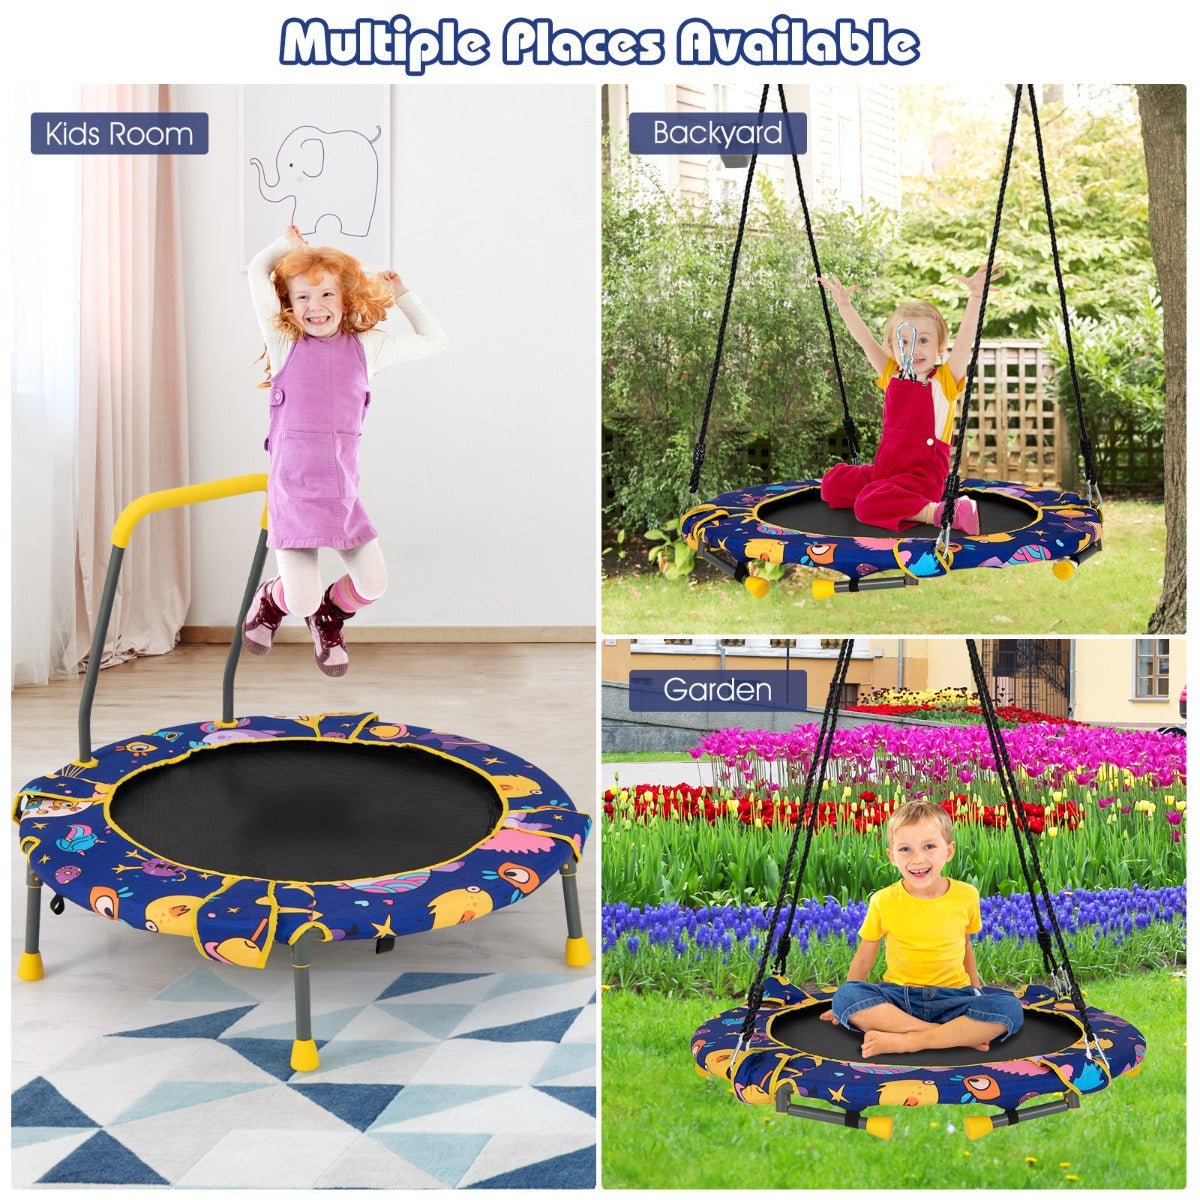 Active Play Haven: Convertible Swing and Trampoline Set with Upholstered Handrail for Kids